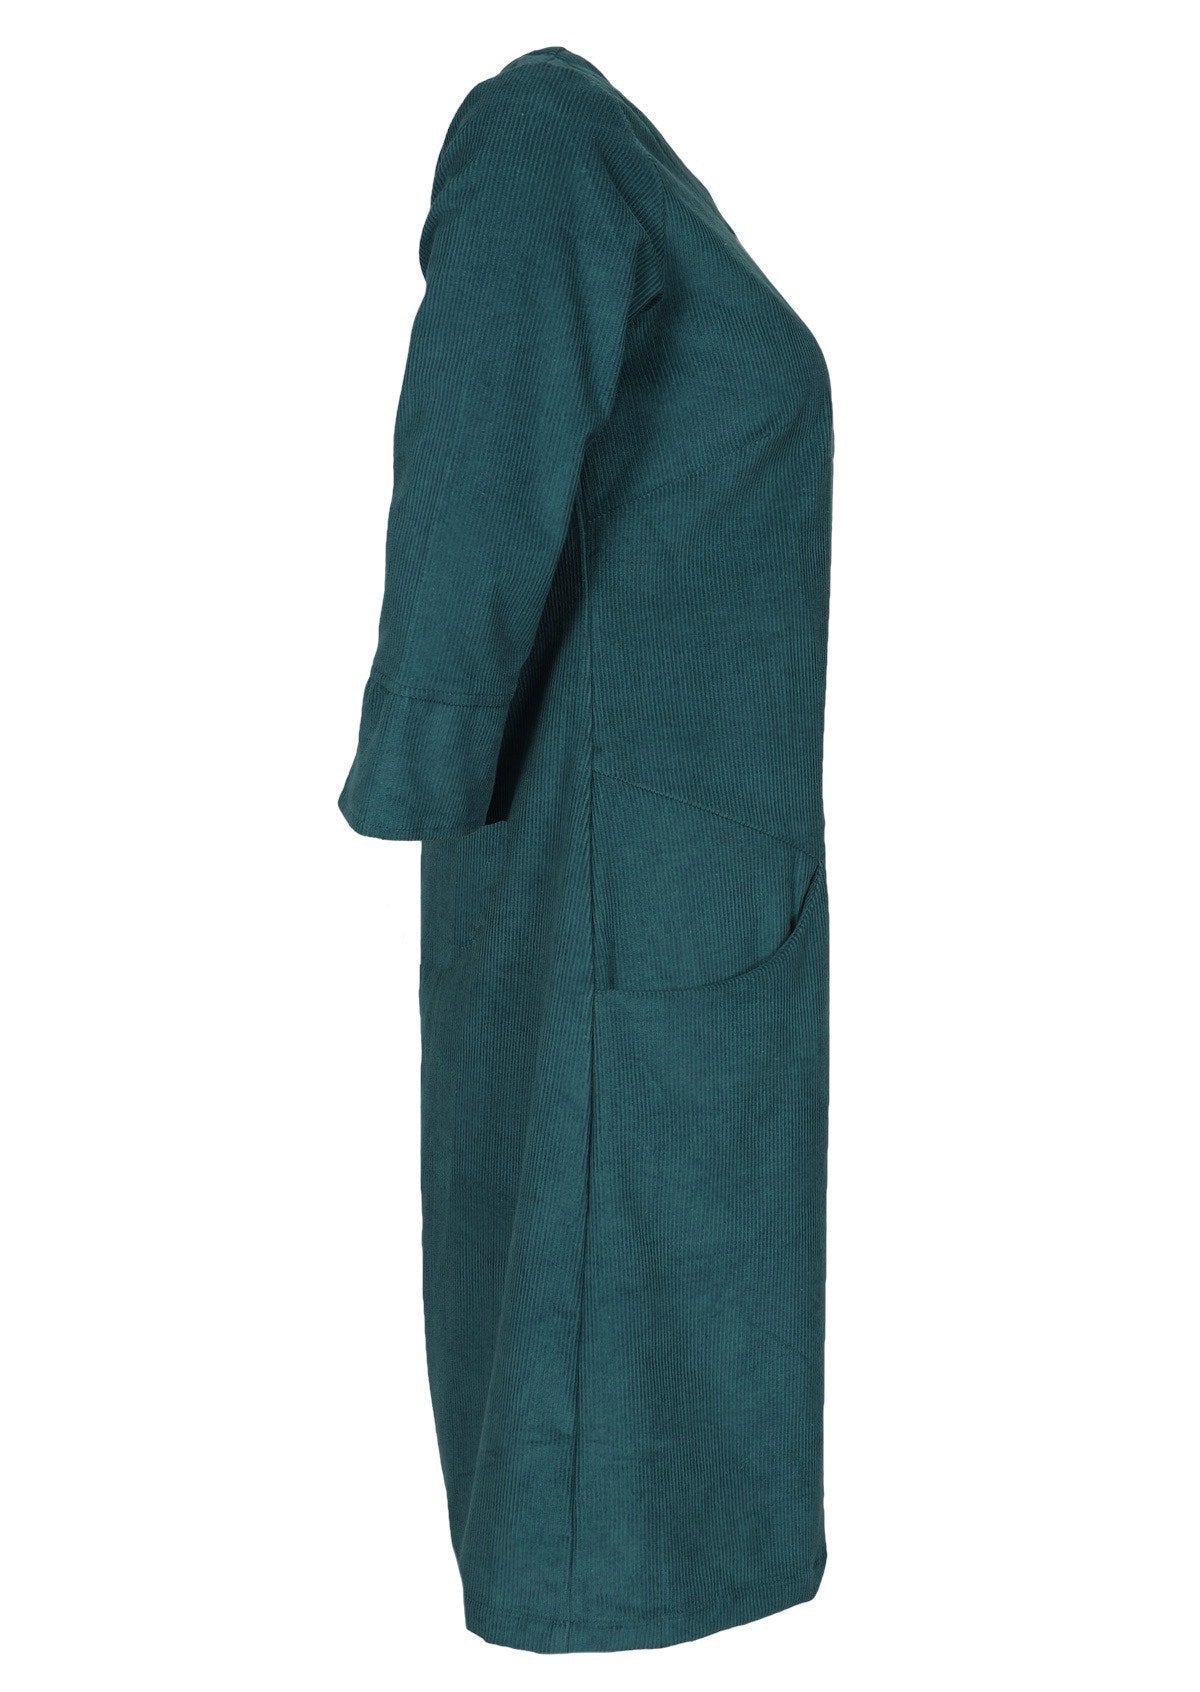 Deep teal cotton corduroy dress features 3/4 sleeves with a detailed cuff. 